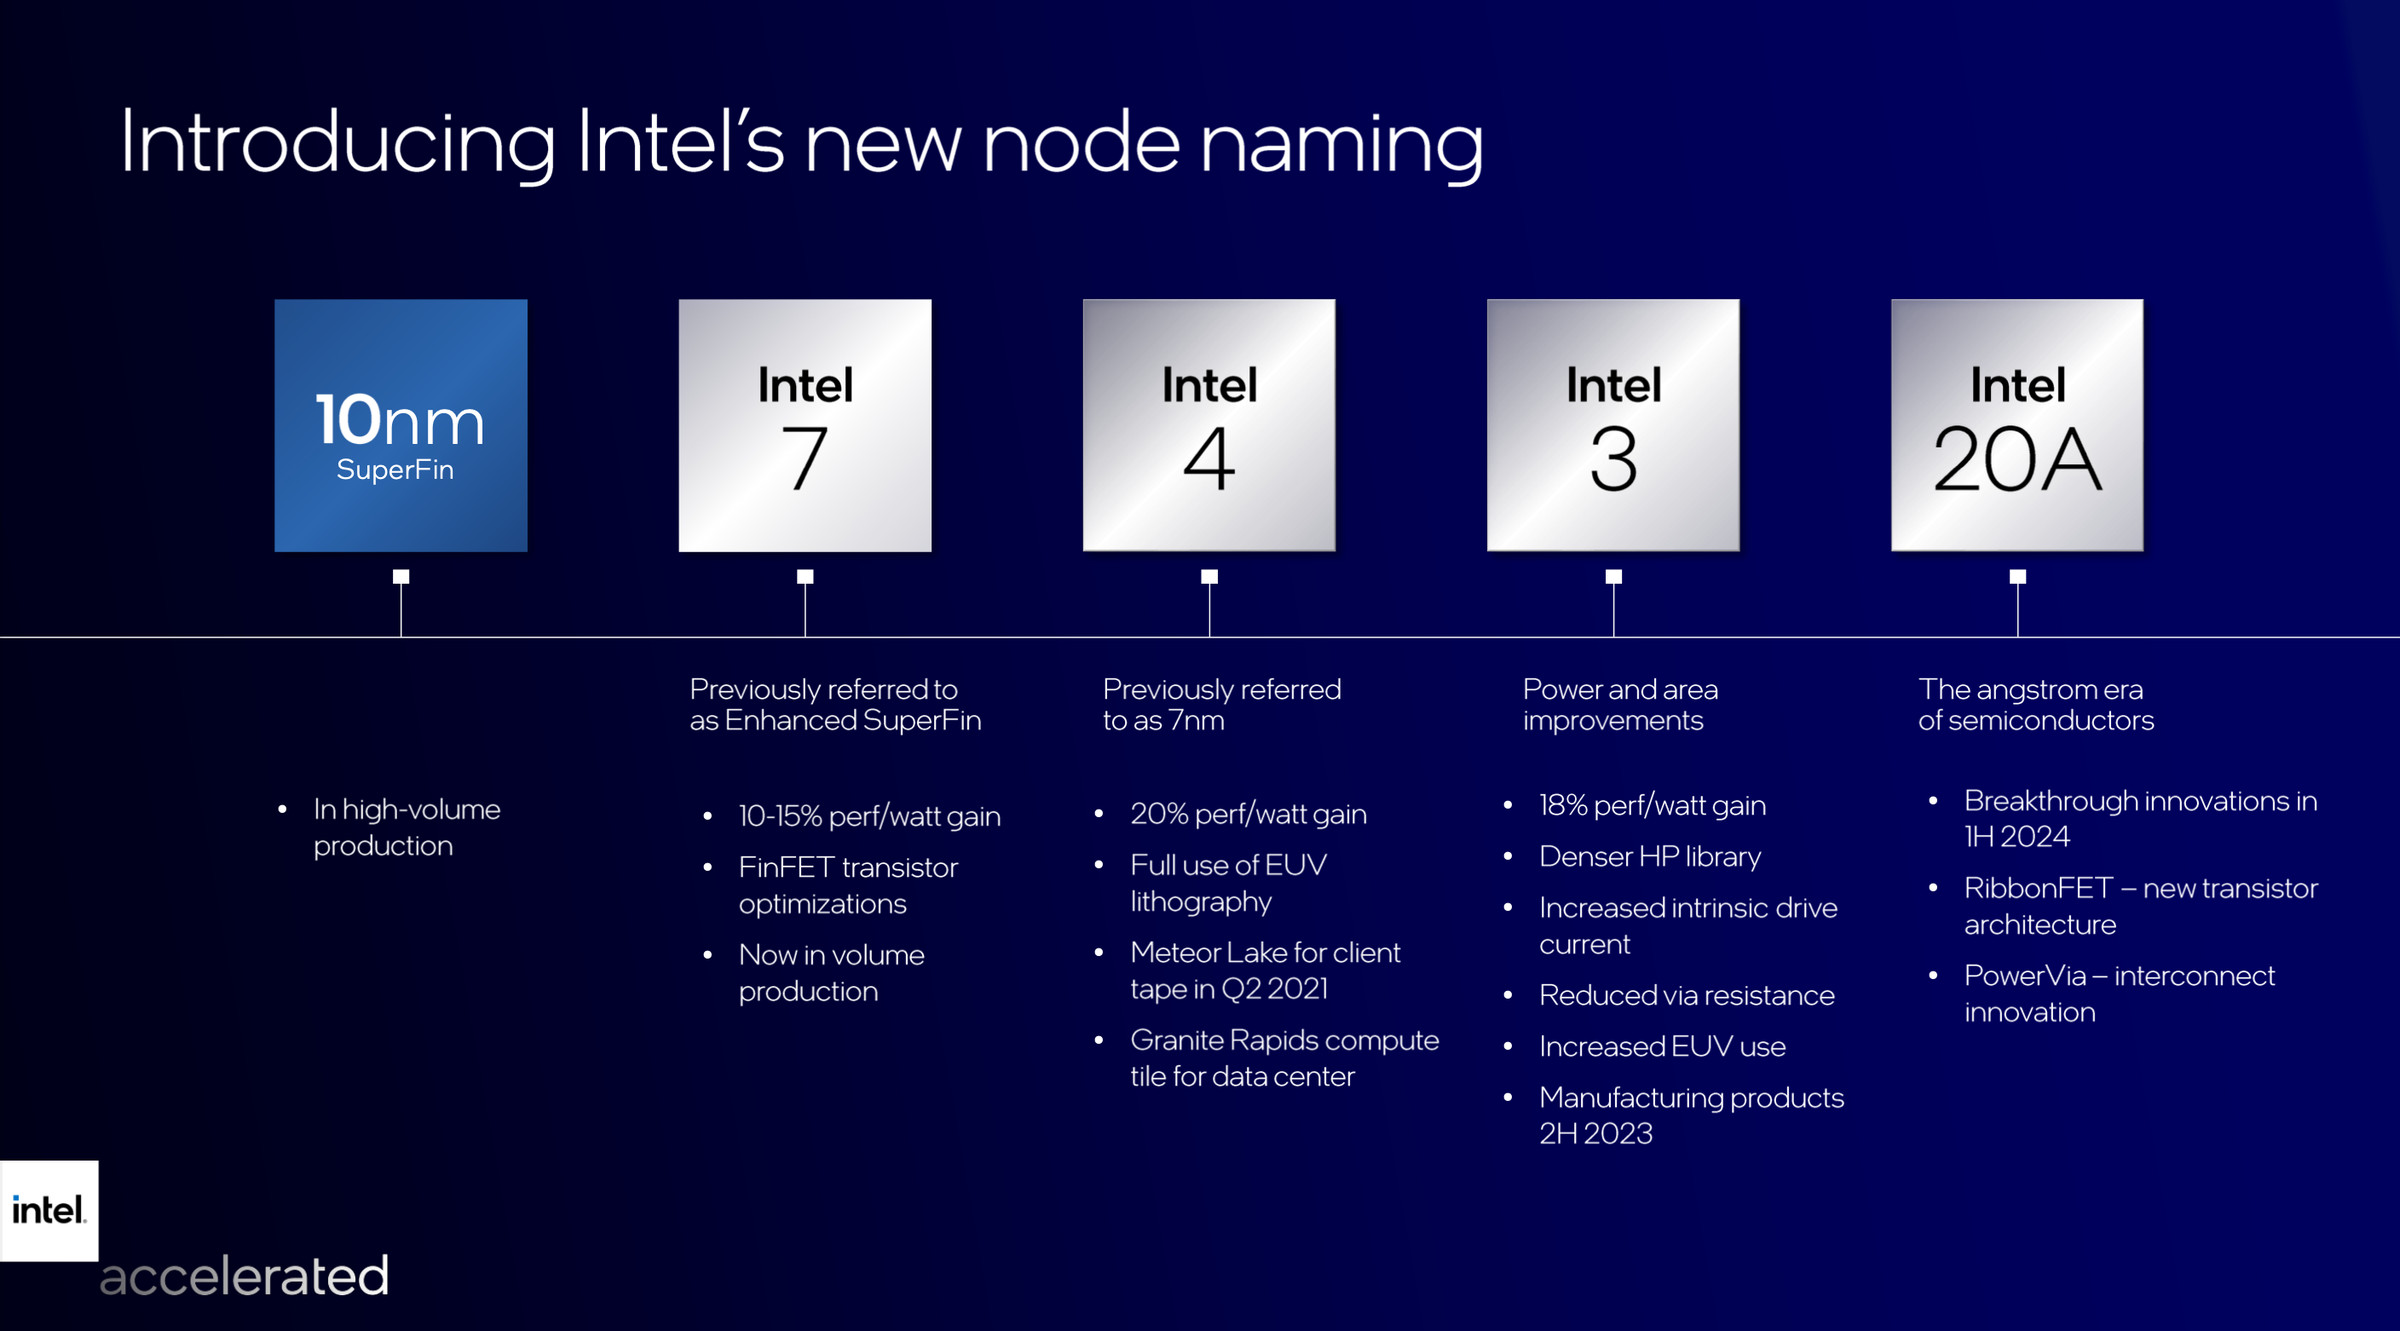 Intel’s updated roadmap and node naming